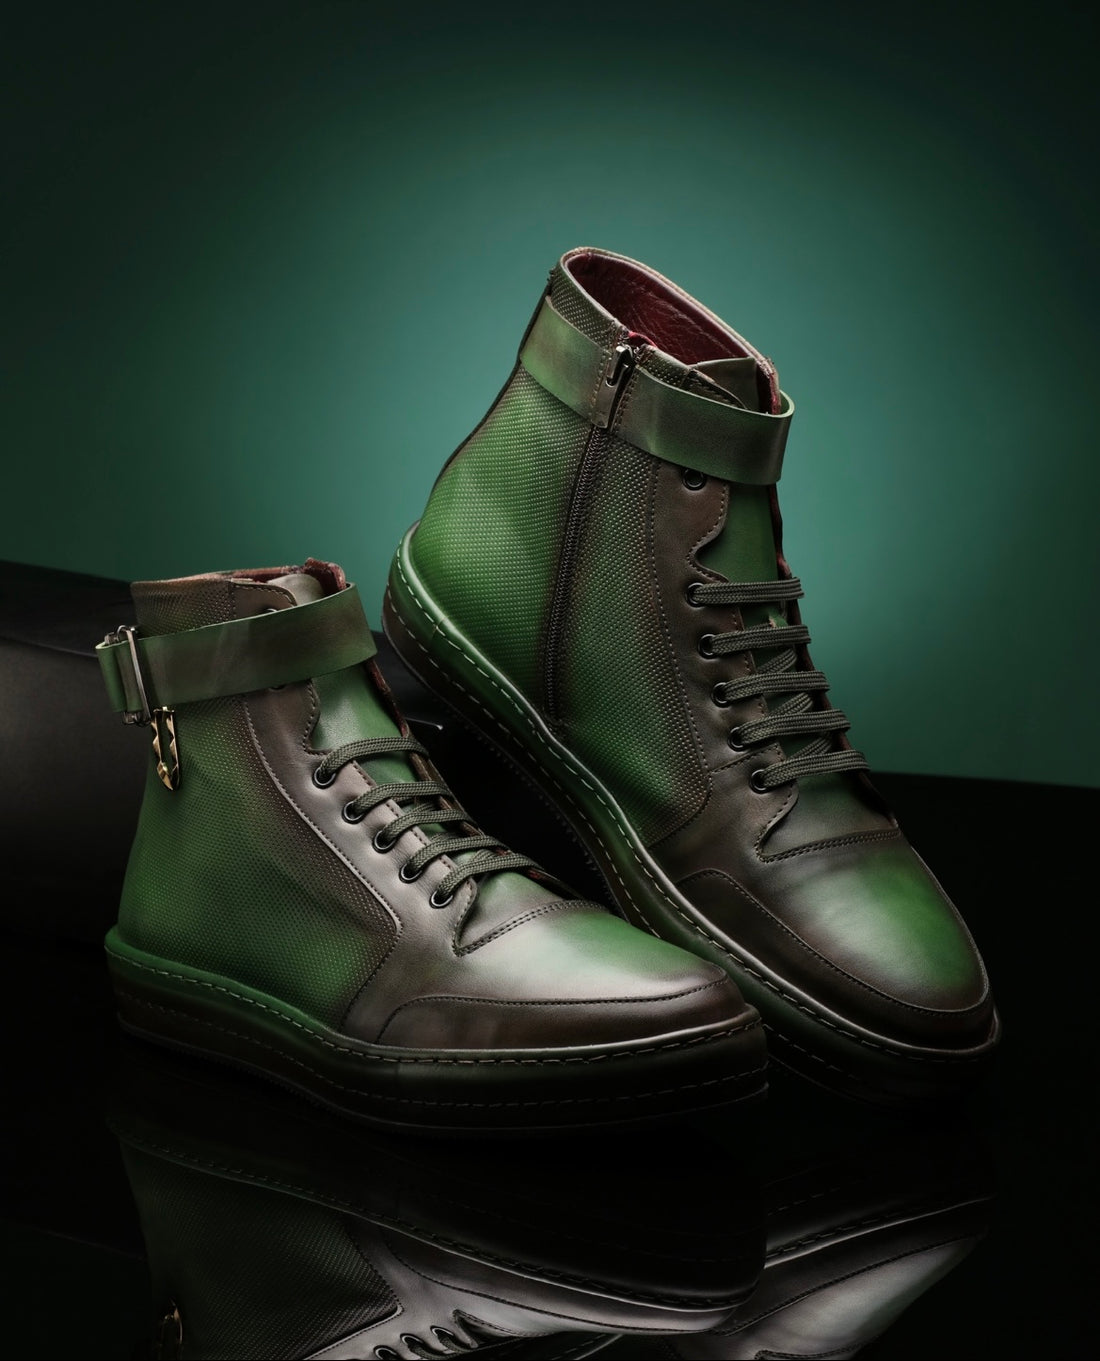 The Green High Top Sneakers